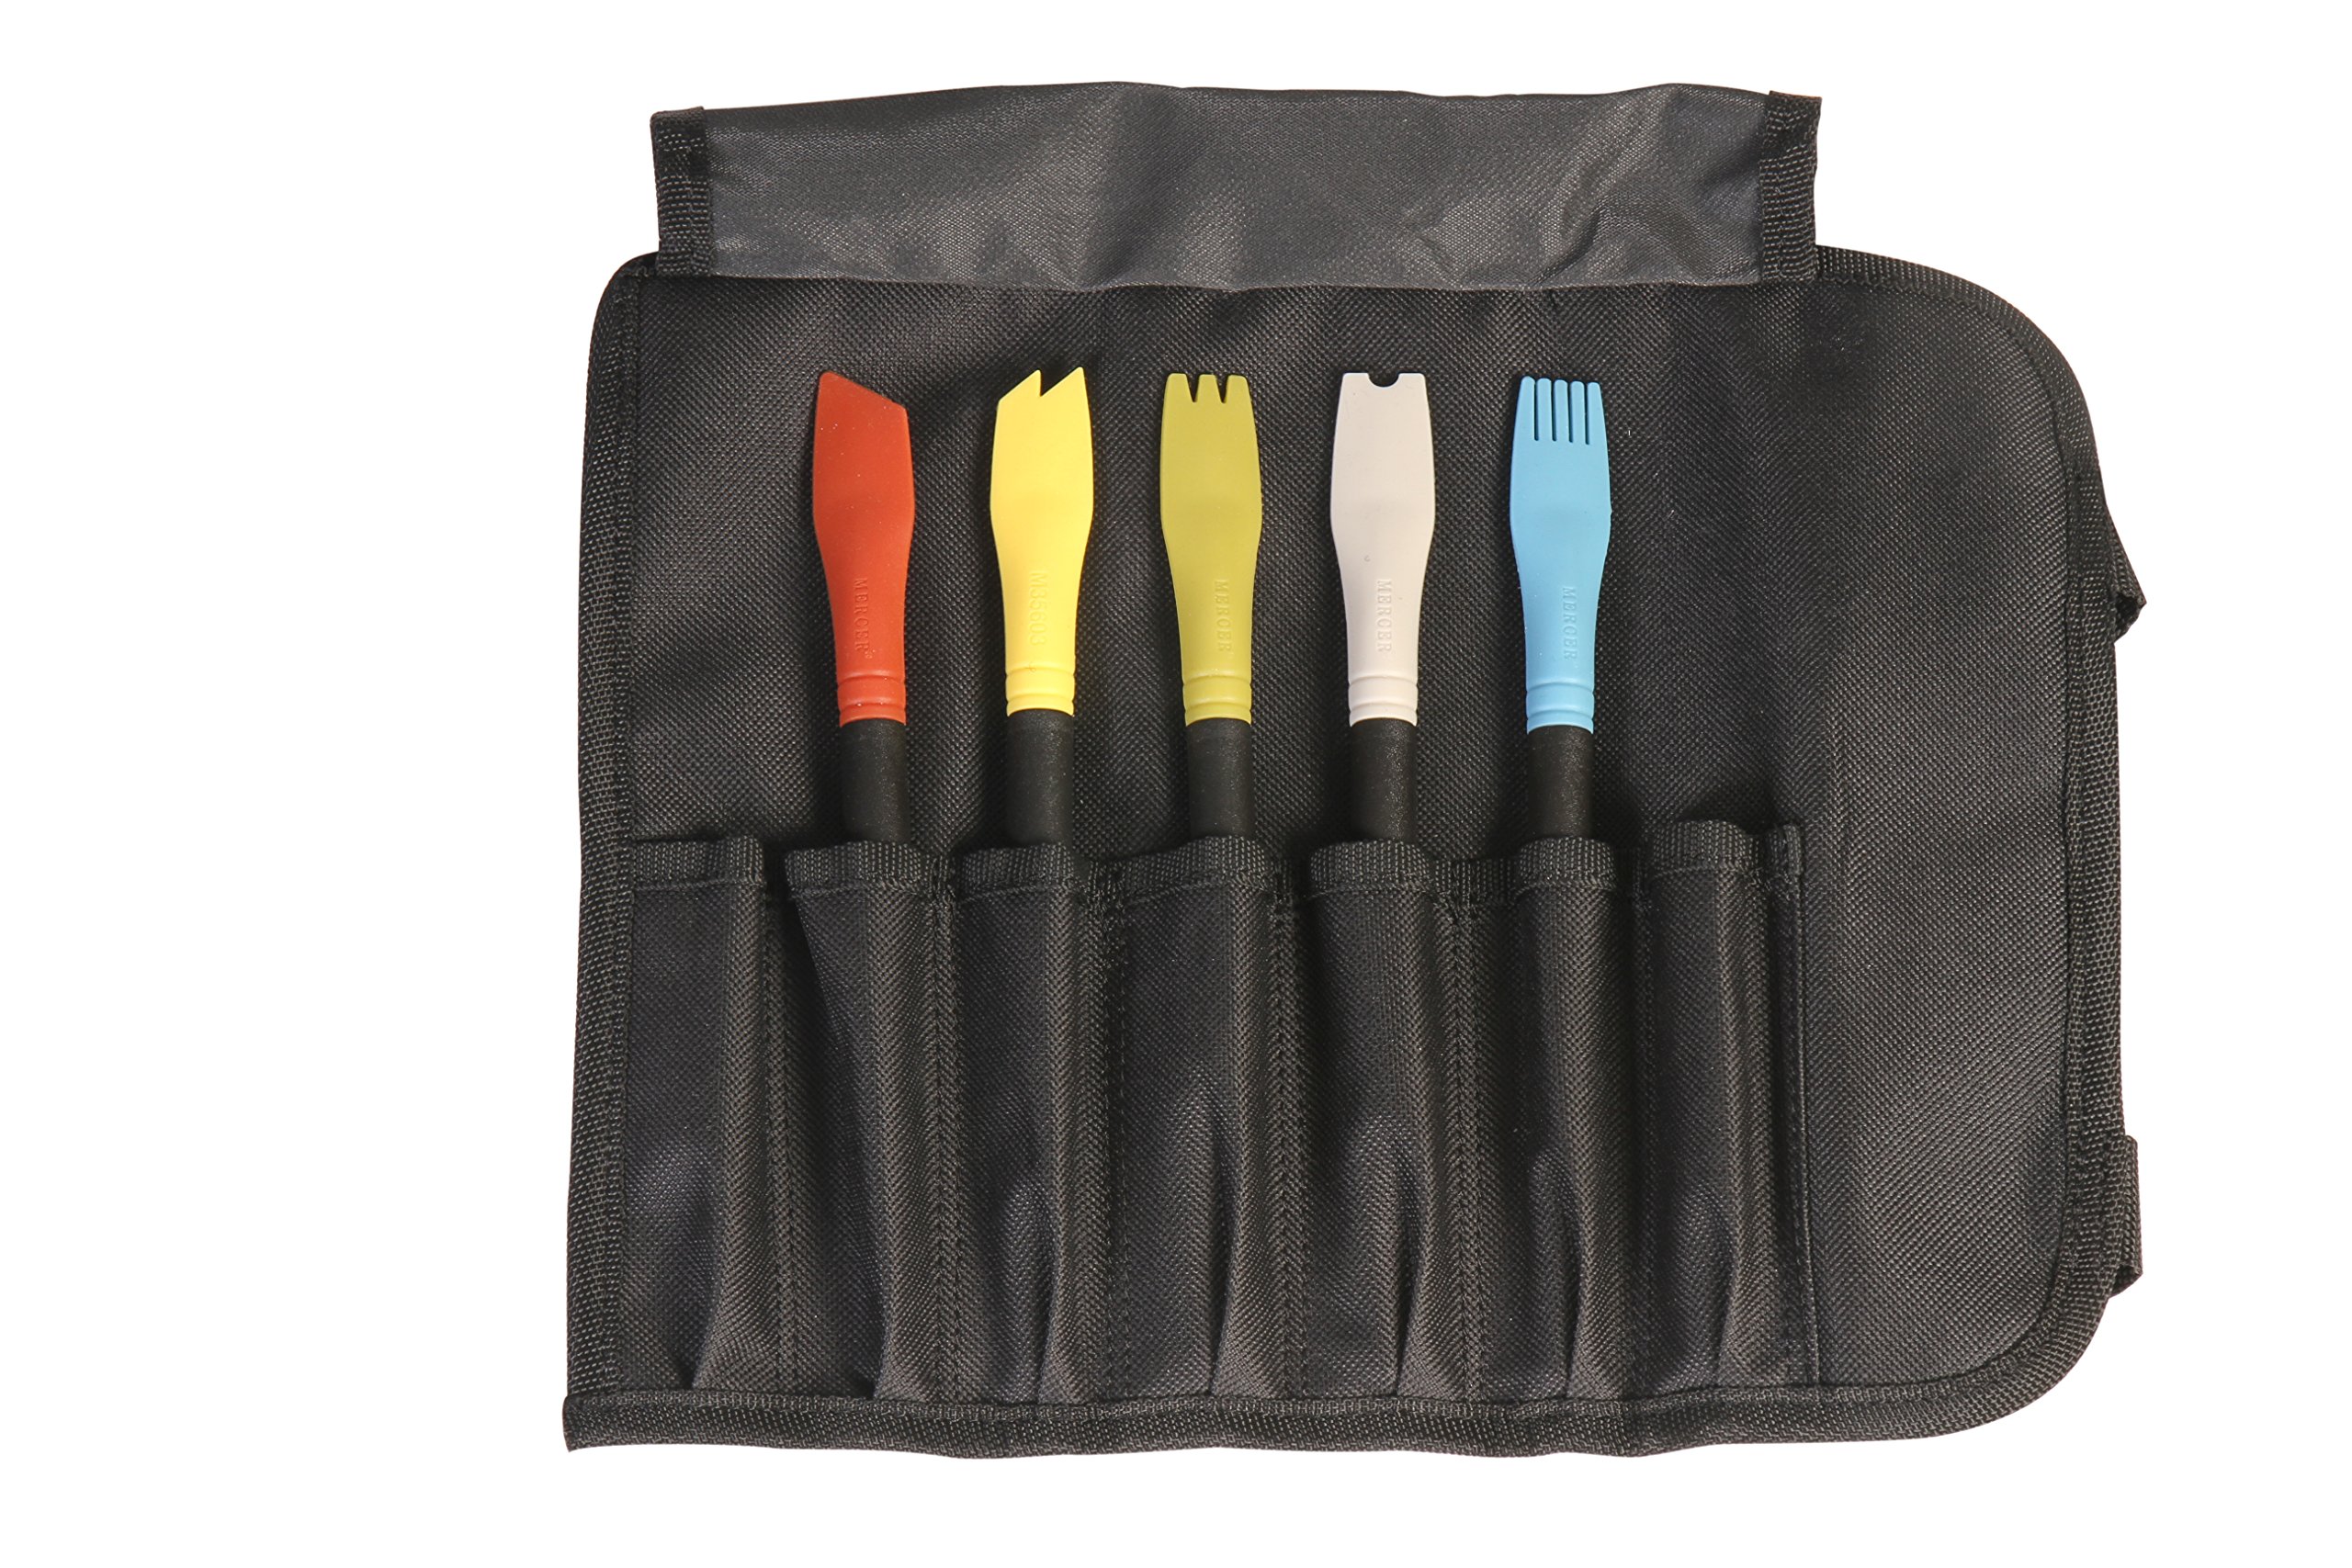 Mercer Culinary Silicone Plating Brush Set- 5 Brushes and a Carrying Case